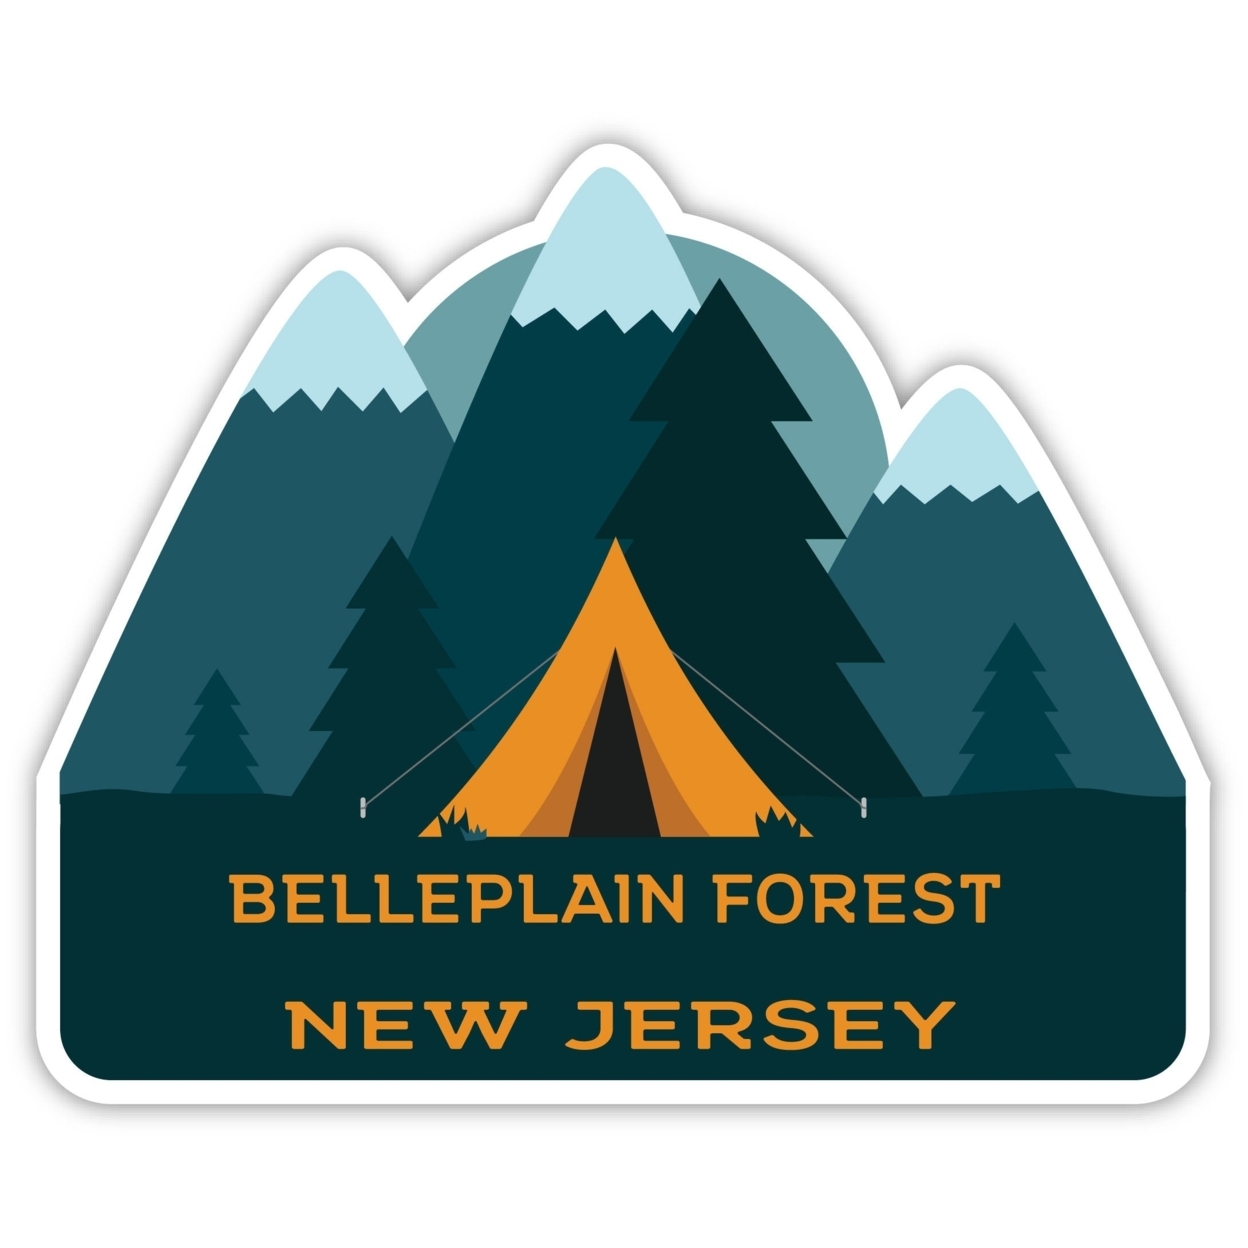 Belleplain Forest New Jersey Souvenir Decorative Stickers (Choose Theme And Size) - 4-Pack, 4-Inch, Tent